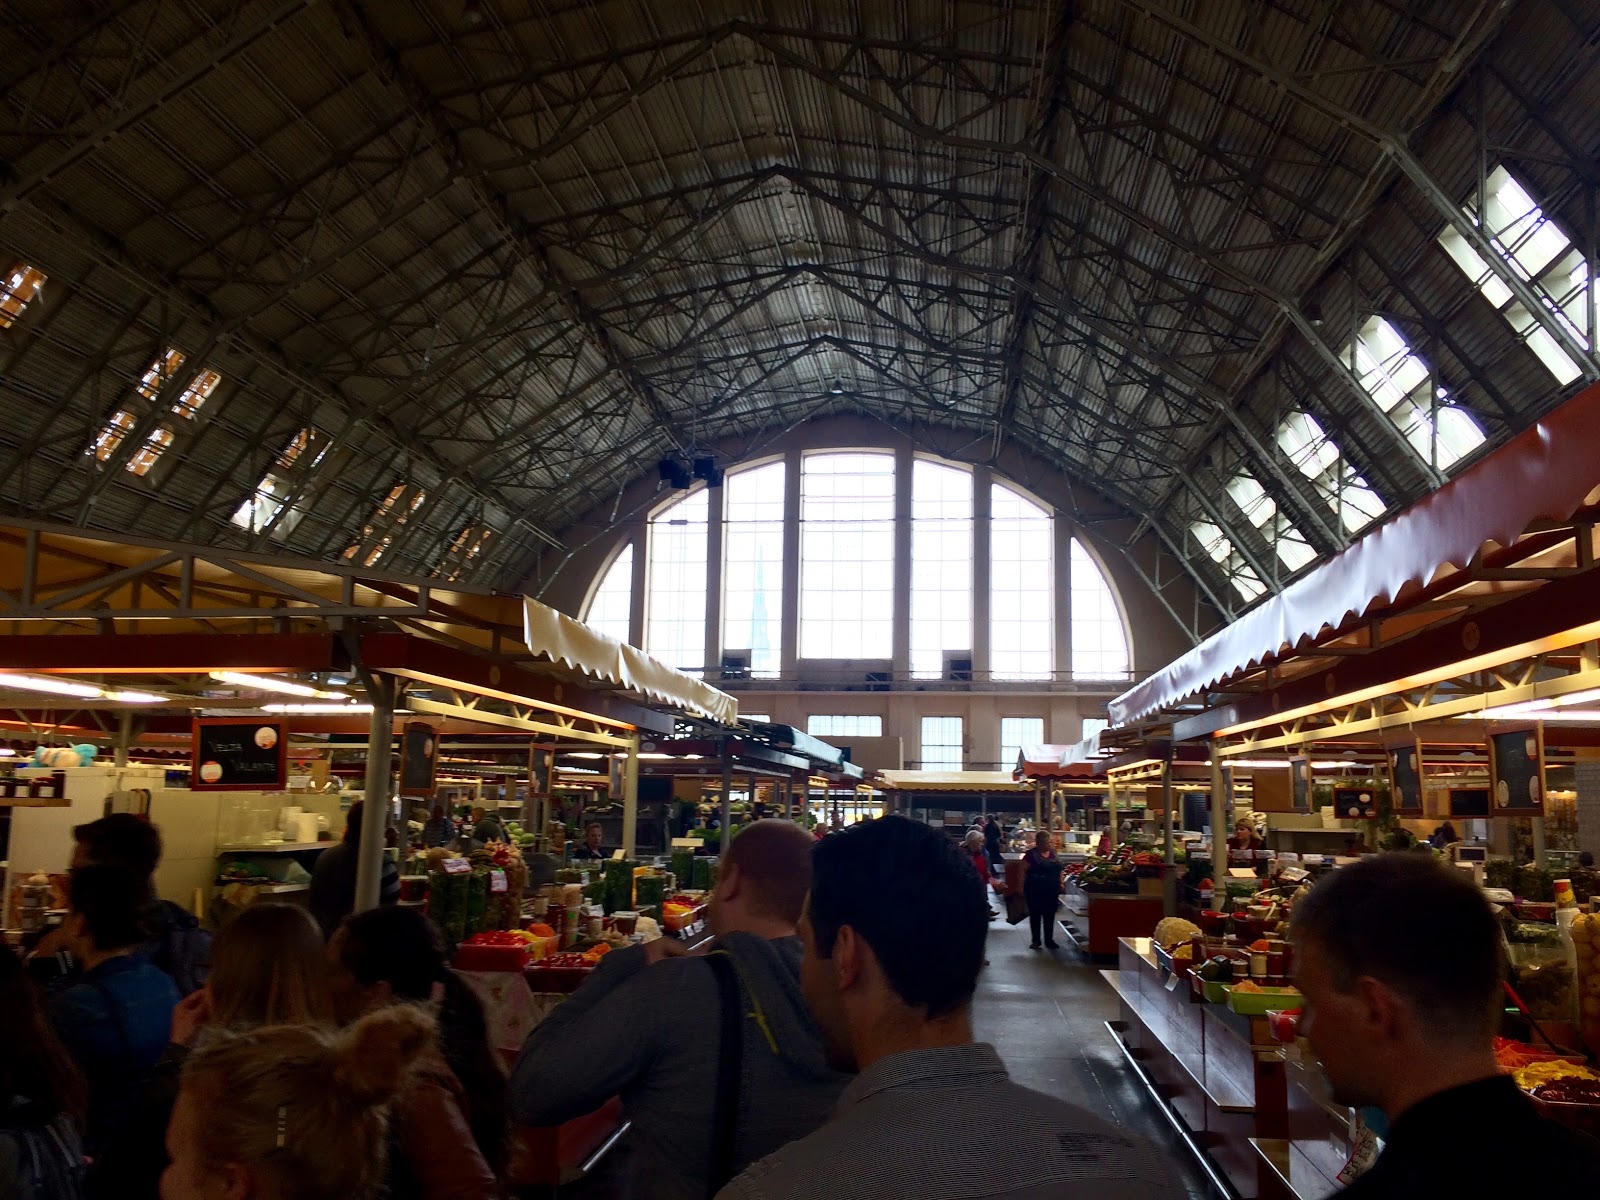 Inside one of the market buildings